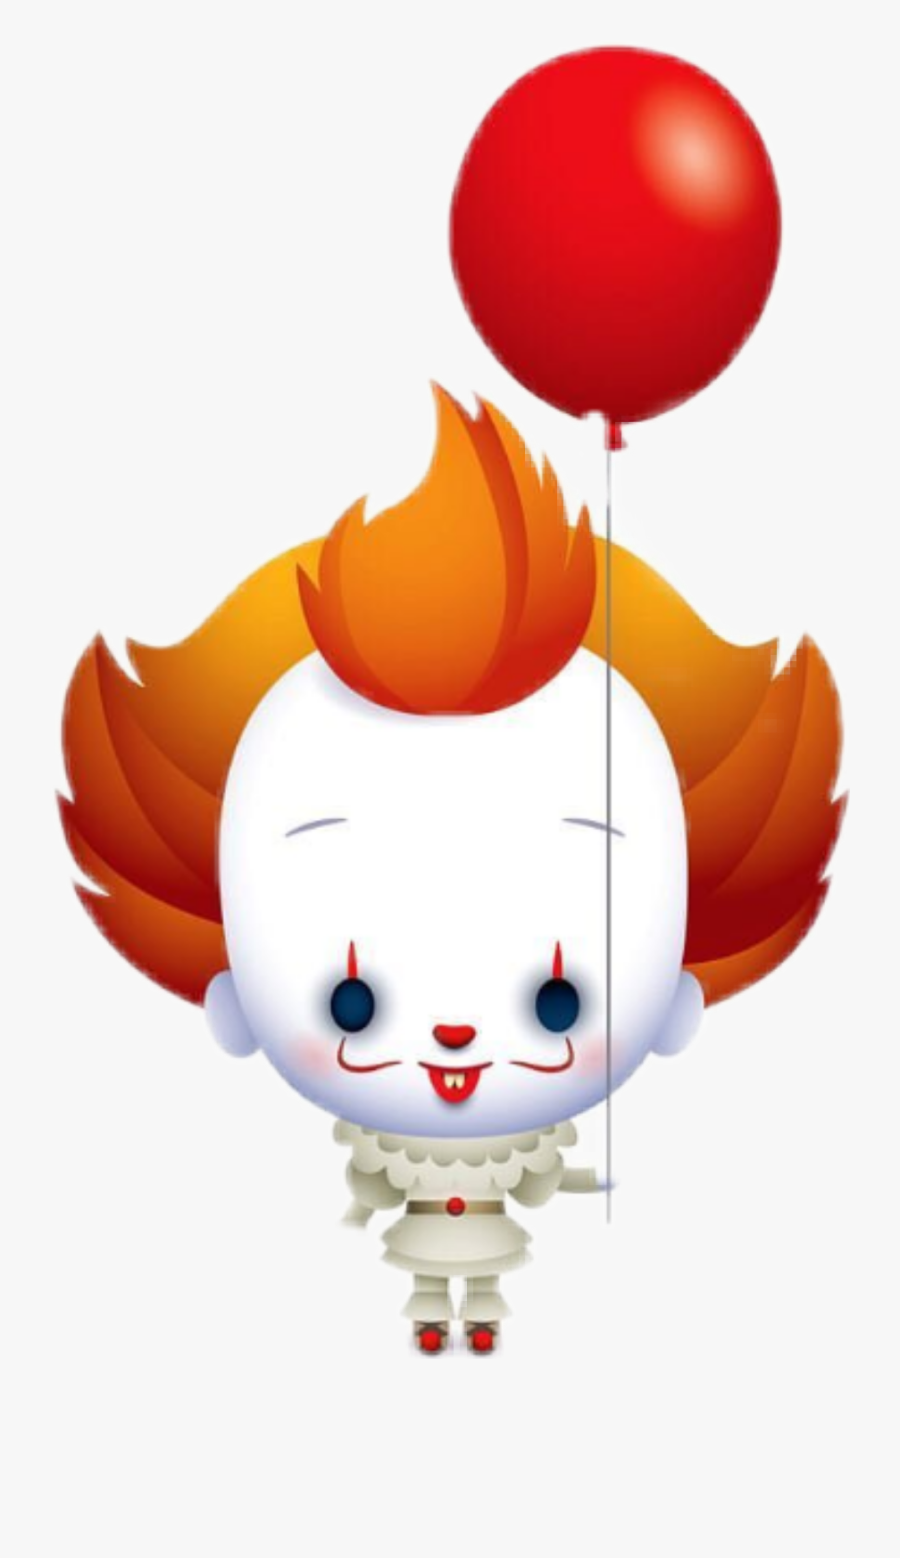 #clown #it #itmovie🎈 #movie #balloon #red #redballoon - Cute Pennywise, Transparent Clipart